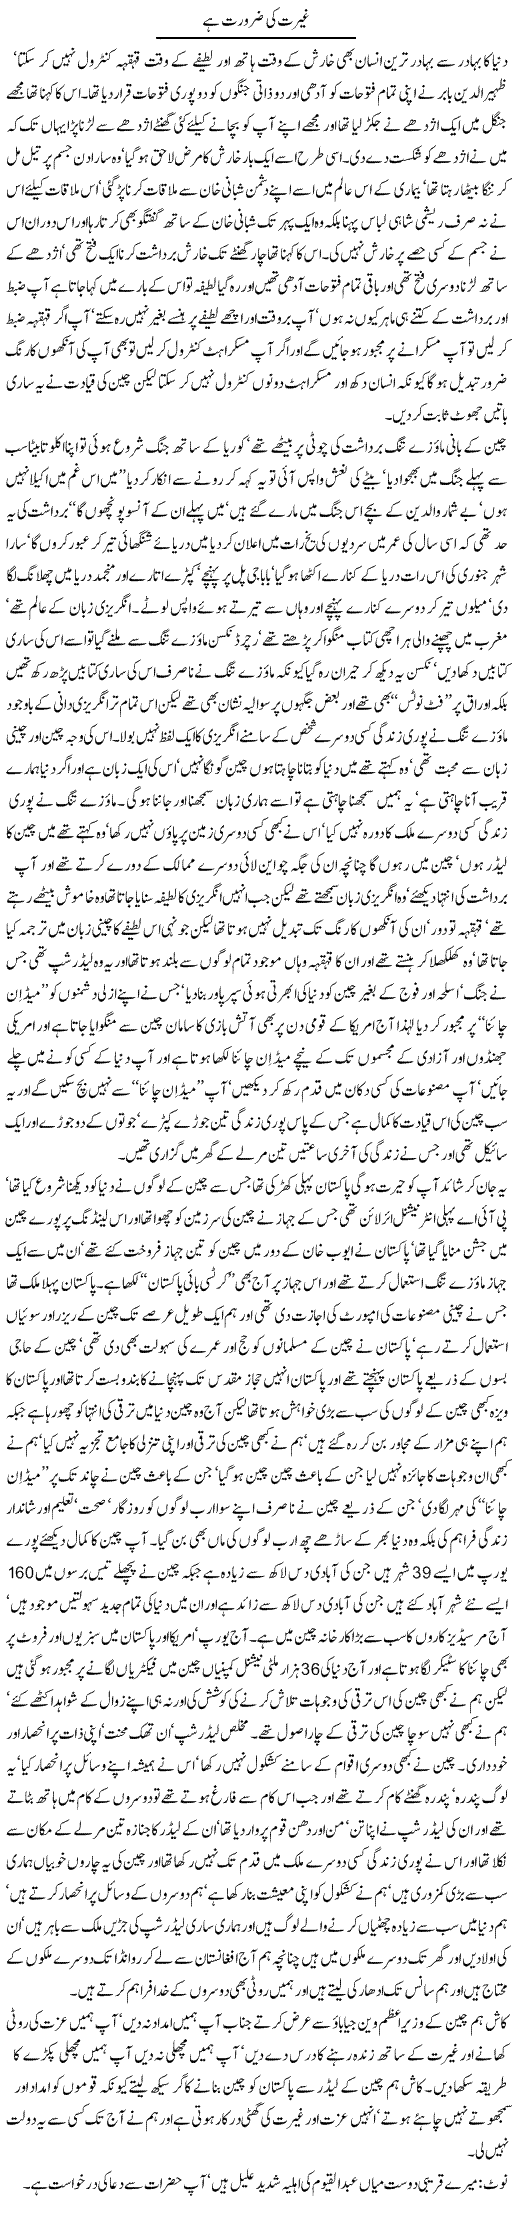 Need of Dignity - Urdu Political Column By Javed Chaudhry